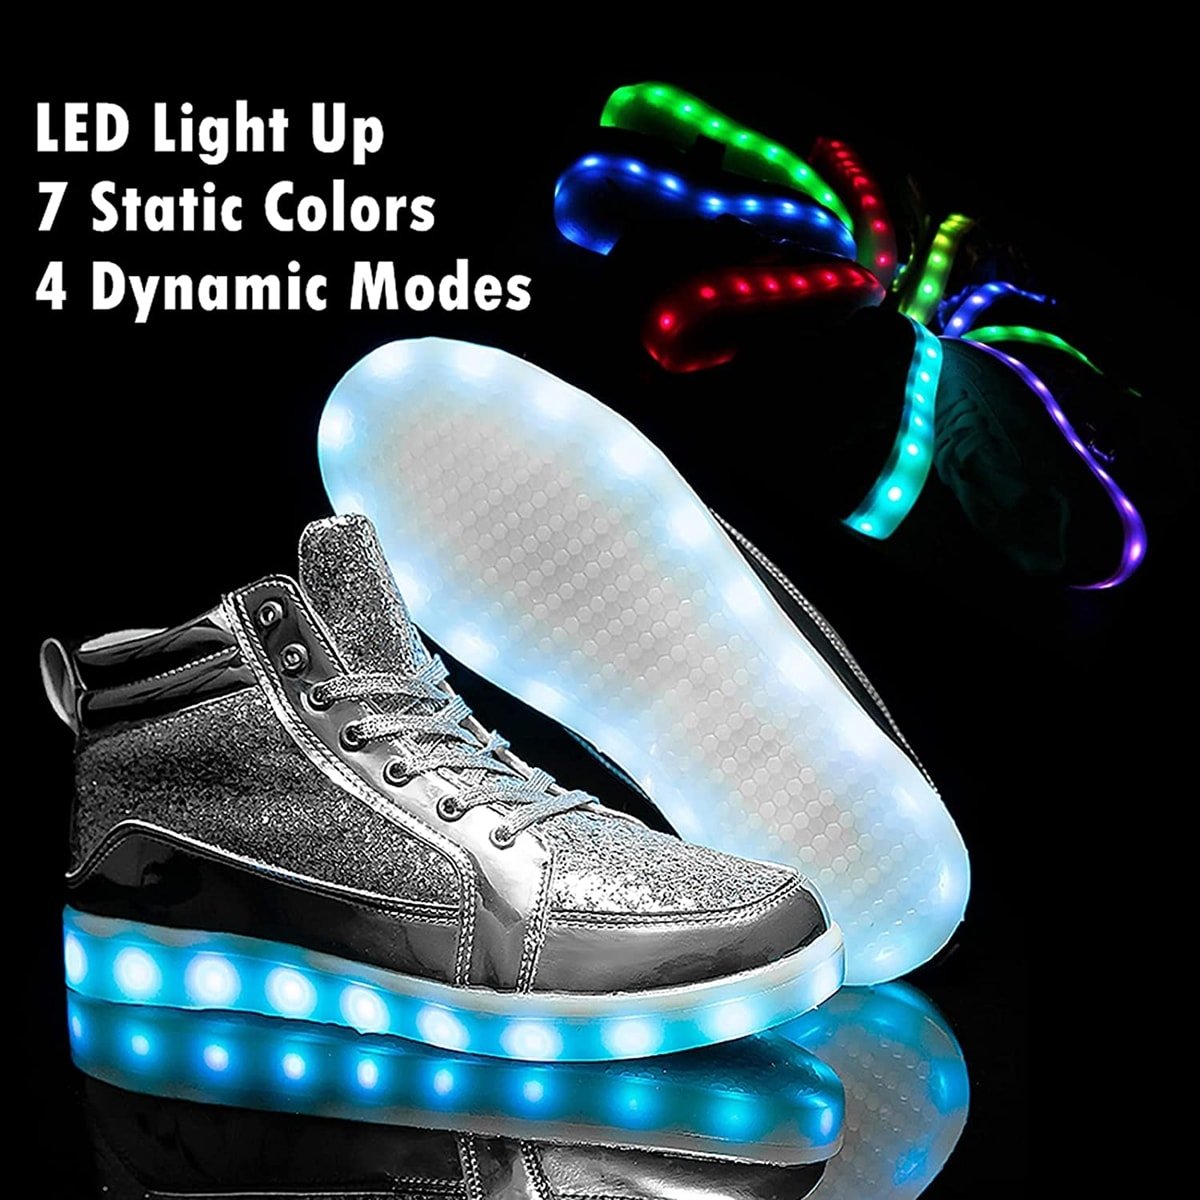 Aizeroth-UK LED Light up Trainers 7 Colors Luminous Flashing USB Charge Breathable Sport Running Shoes High Top Dancing Gymnastic Tennis Sneakers Best Gift for Boys and Girls Birthday White 